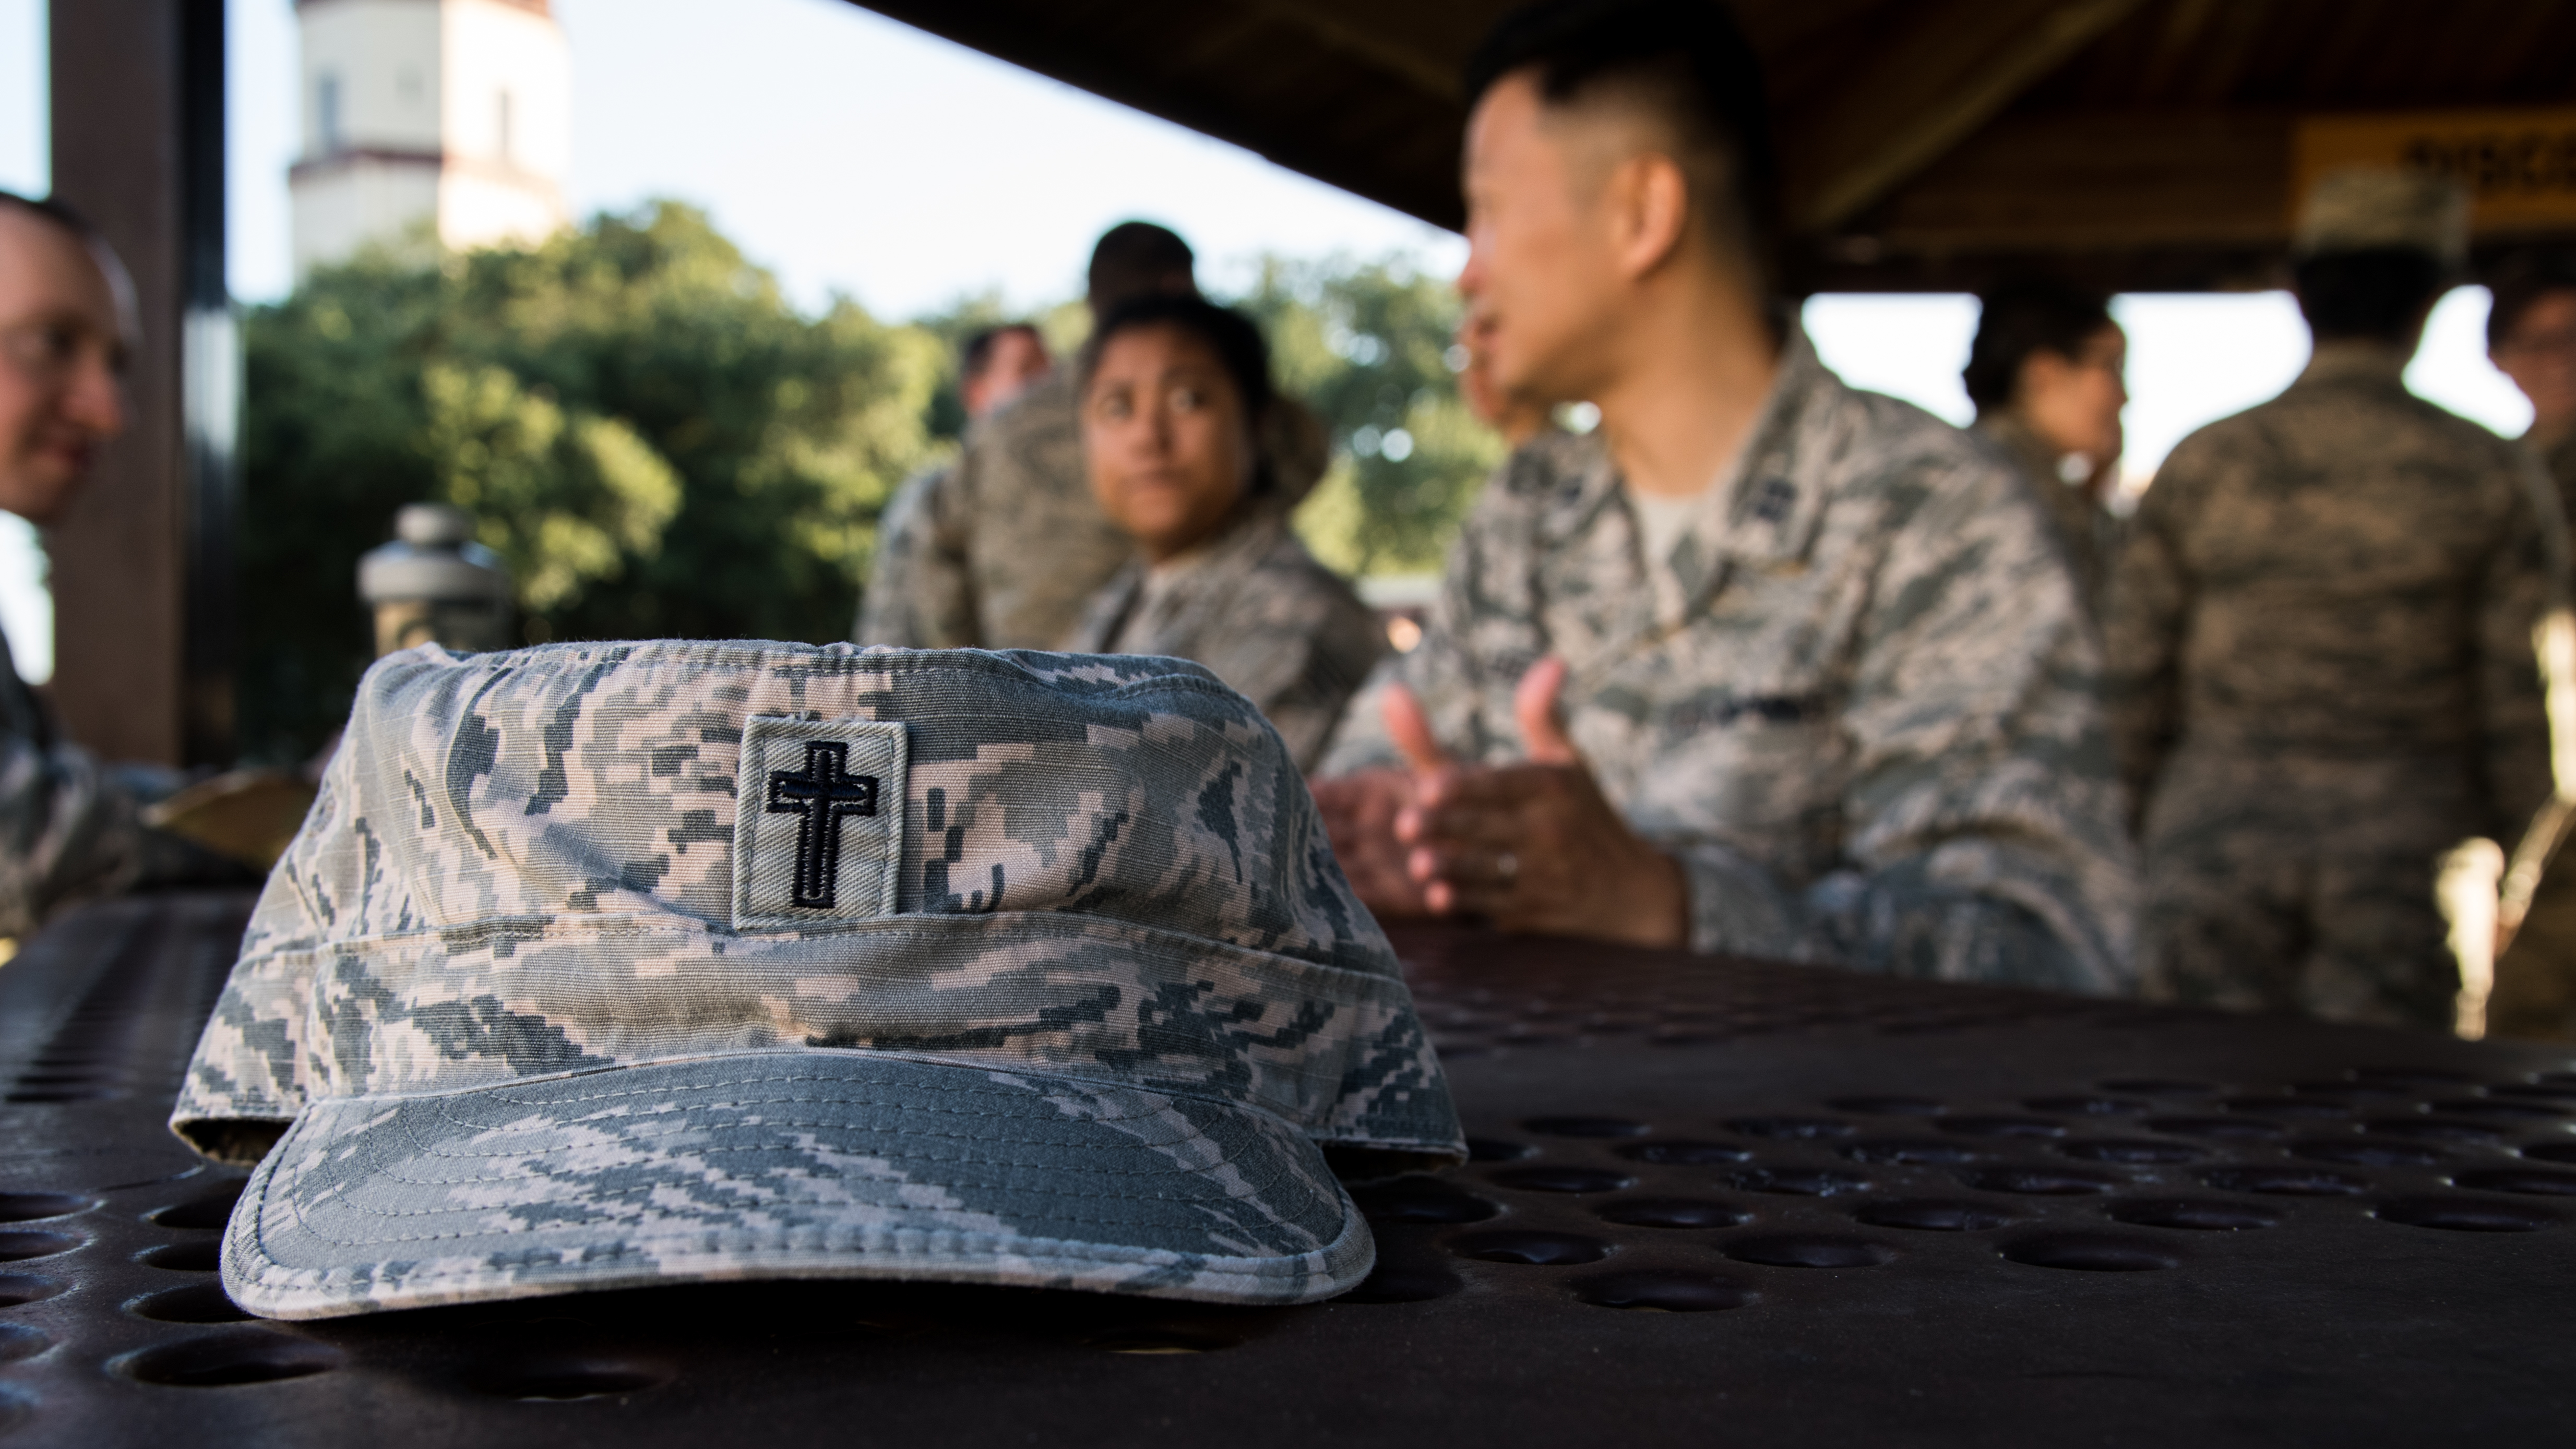 A U.S. Air Force chaplain's cover rests on a table as a service member discusses faith-related concerns during a religious service. (U.S. Air Force photo by Airman 1st Class Jacob B. Wrightsman) 